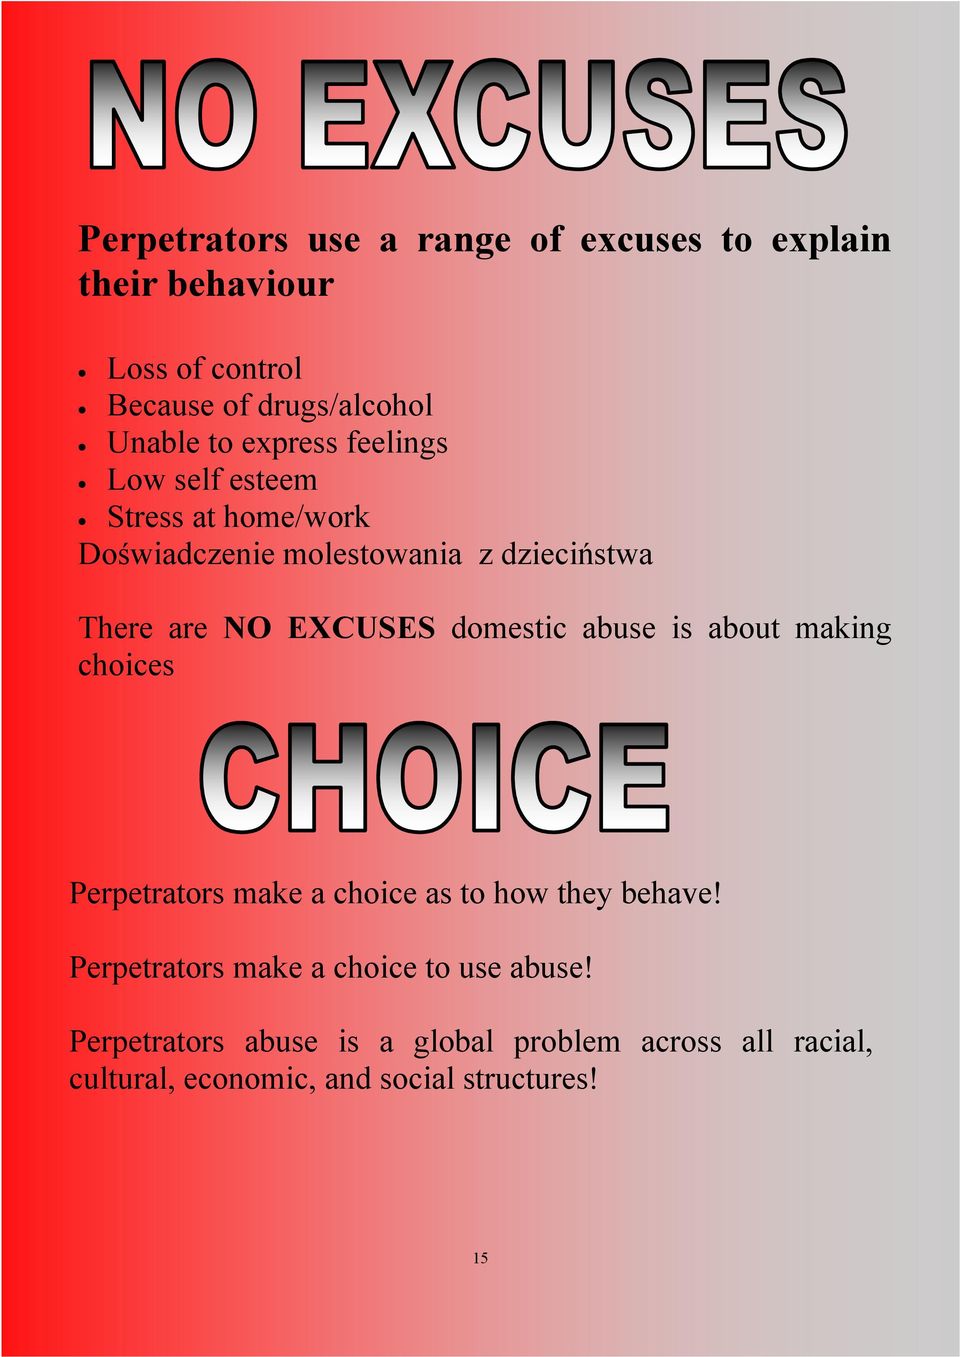 domestic abuse is about making choices Perpetrators make a choice as to how they behave!